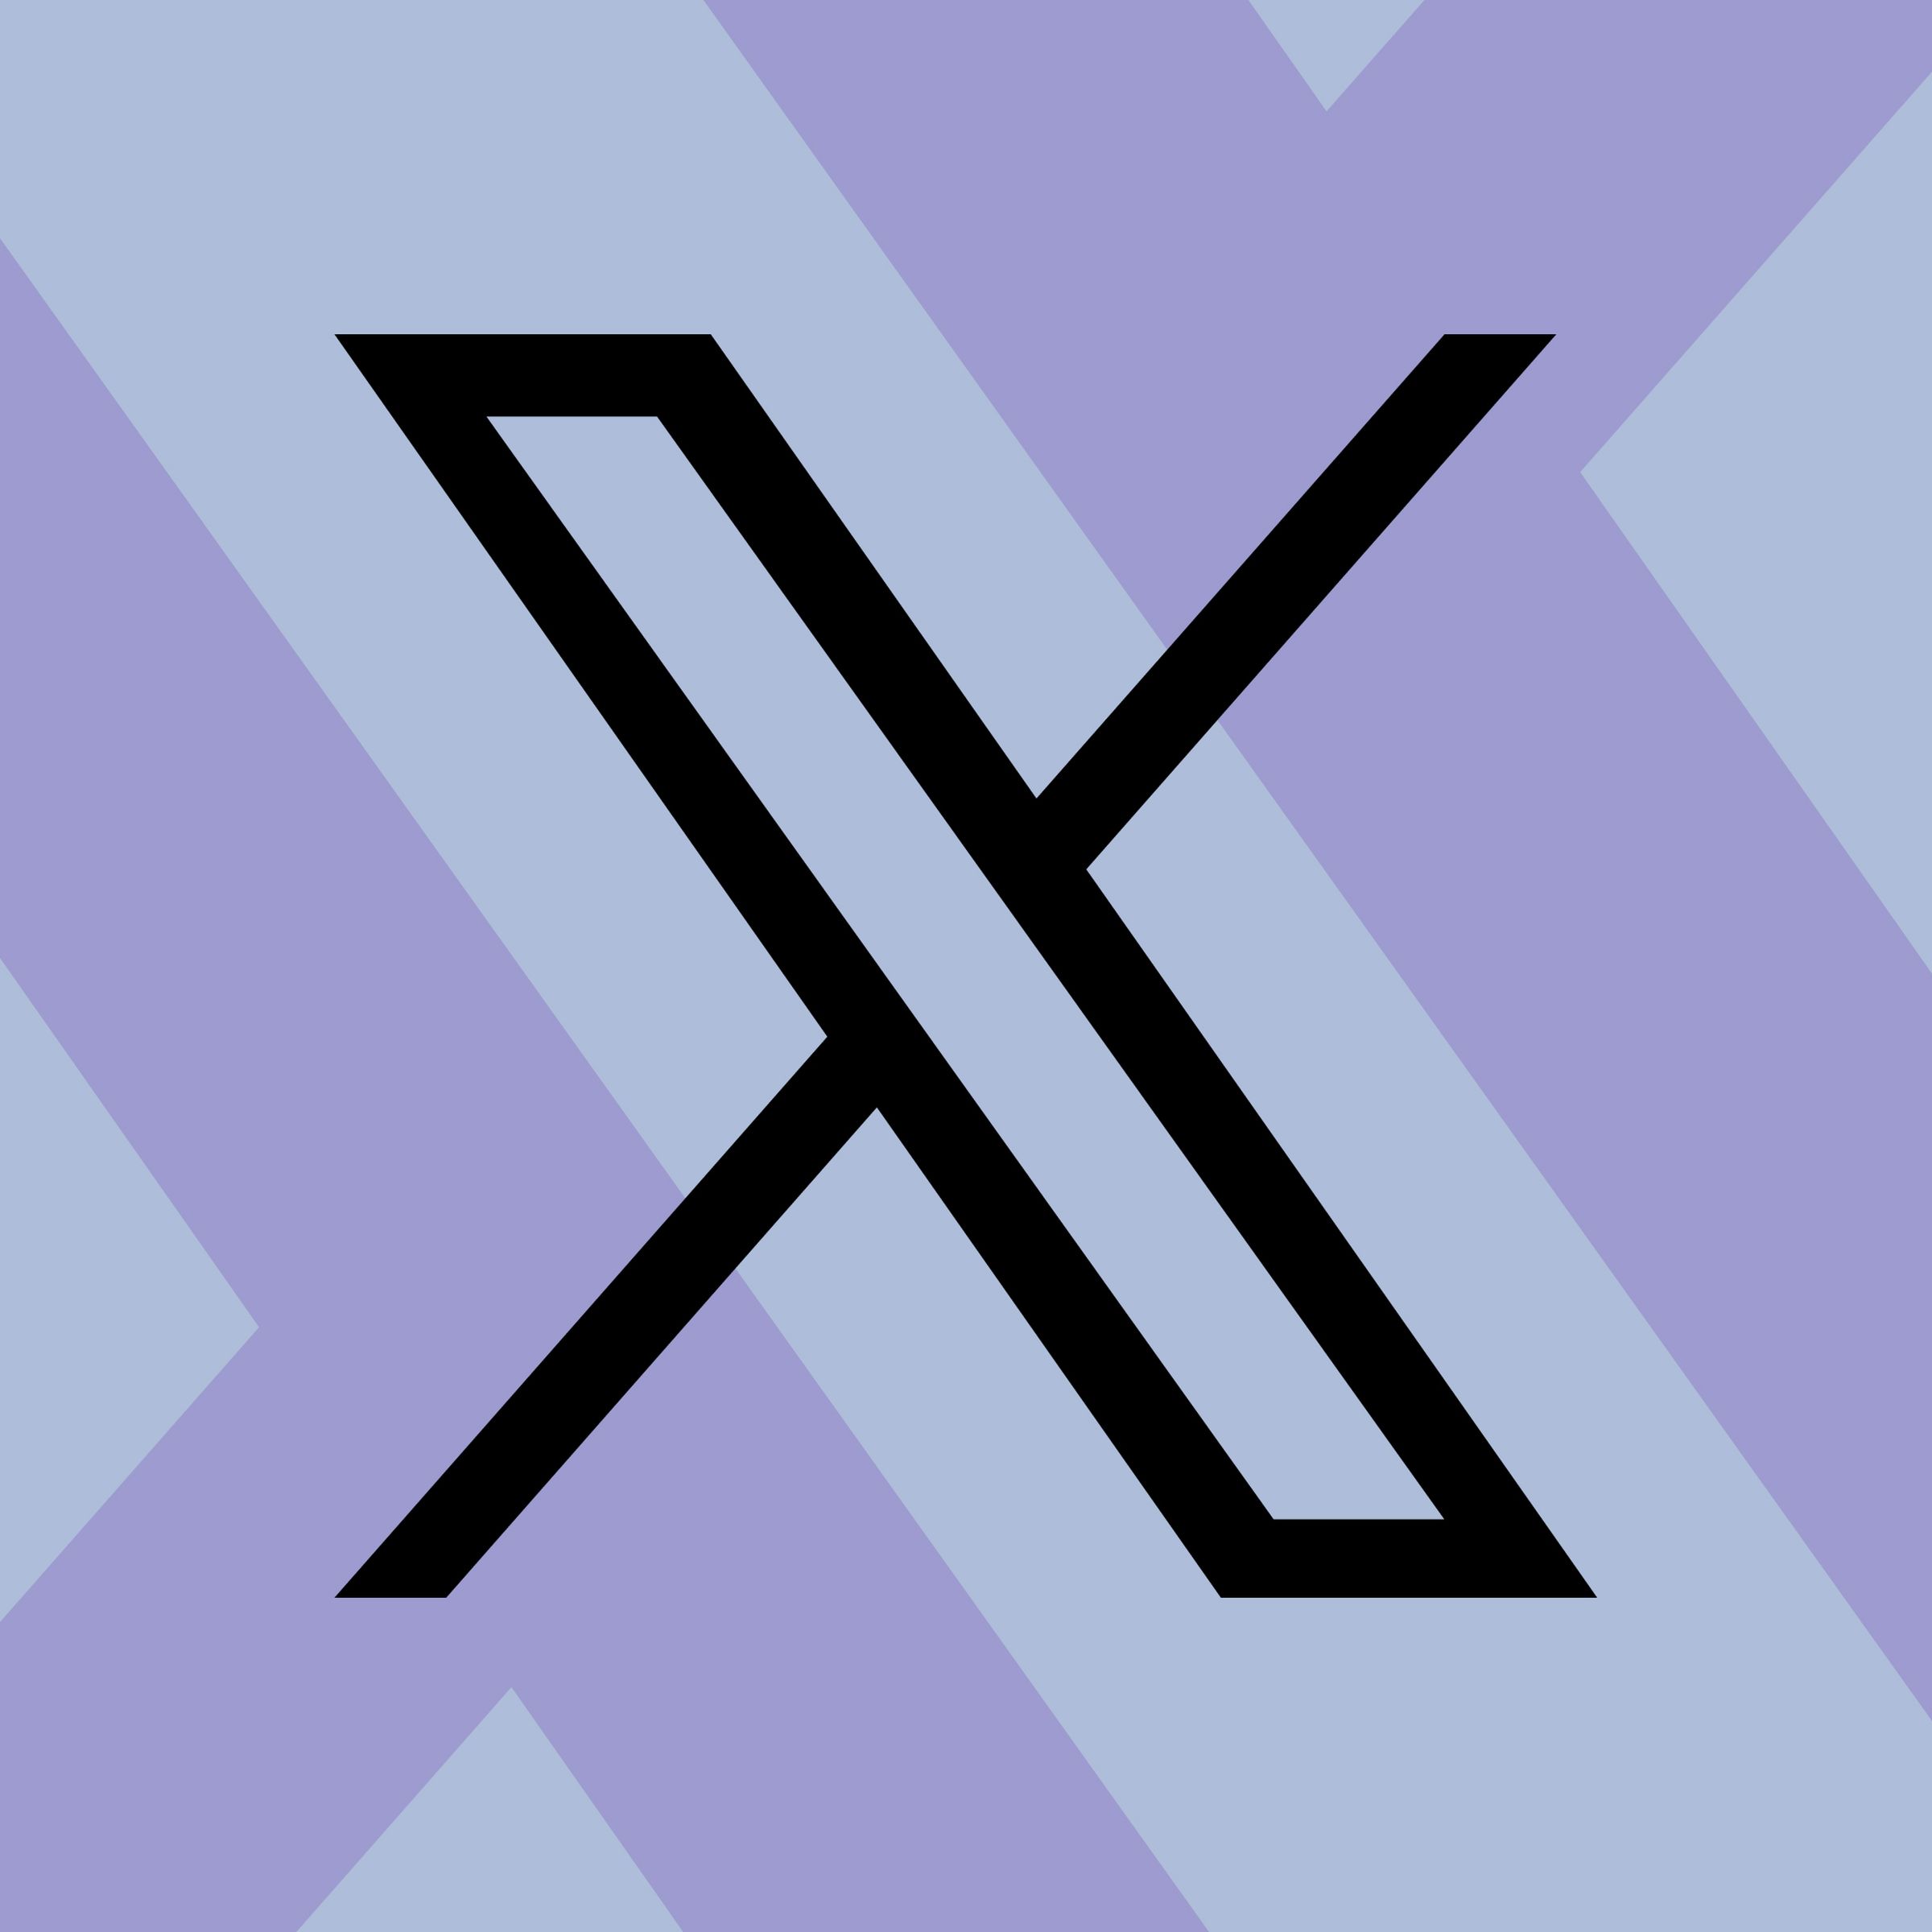 The X logo on a colorful blue and light purple background.